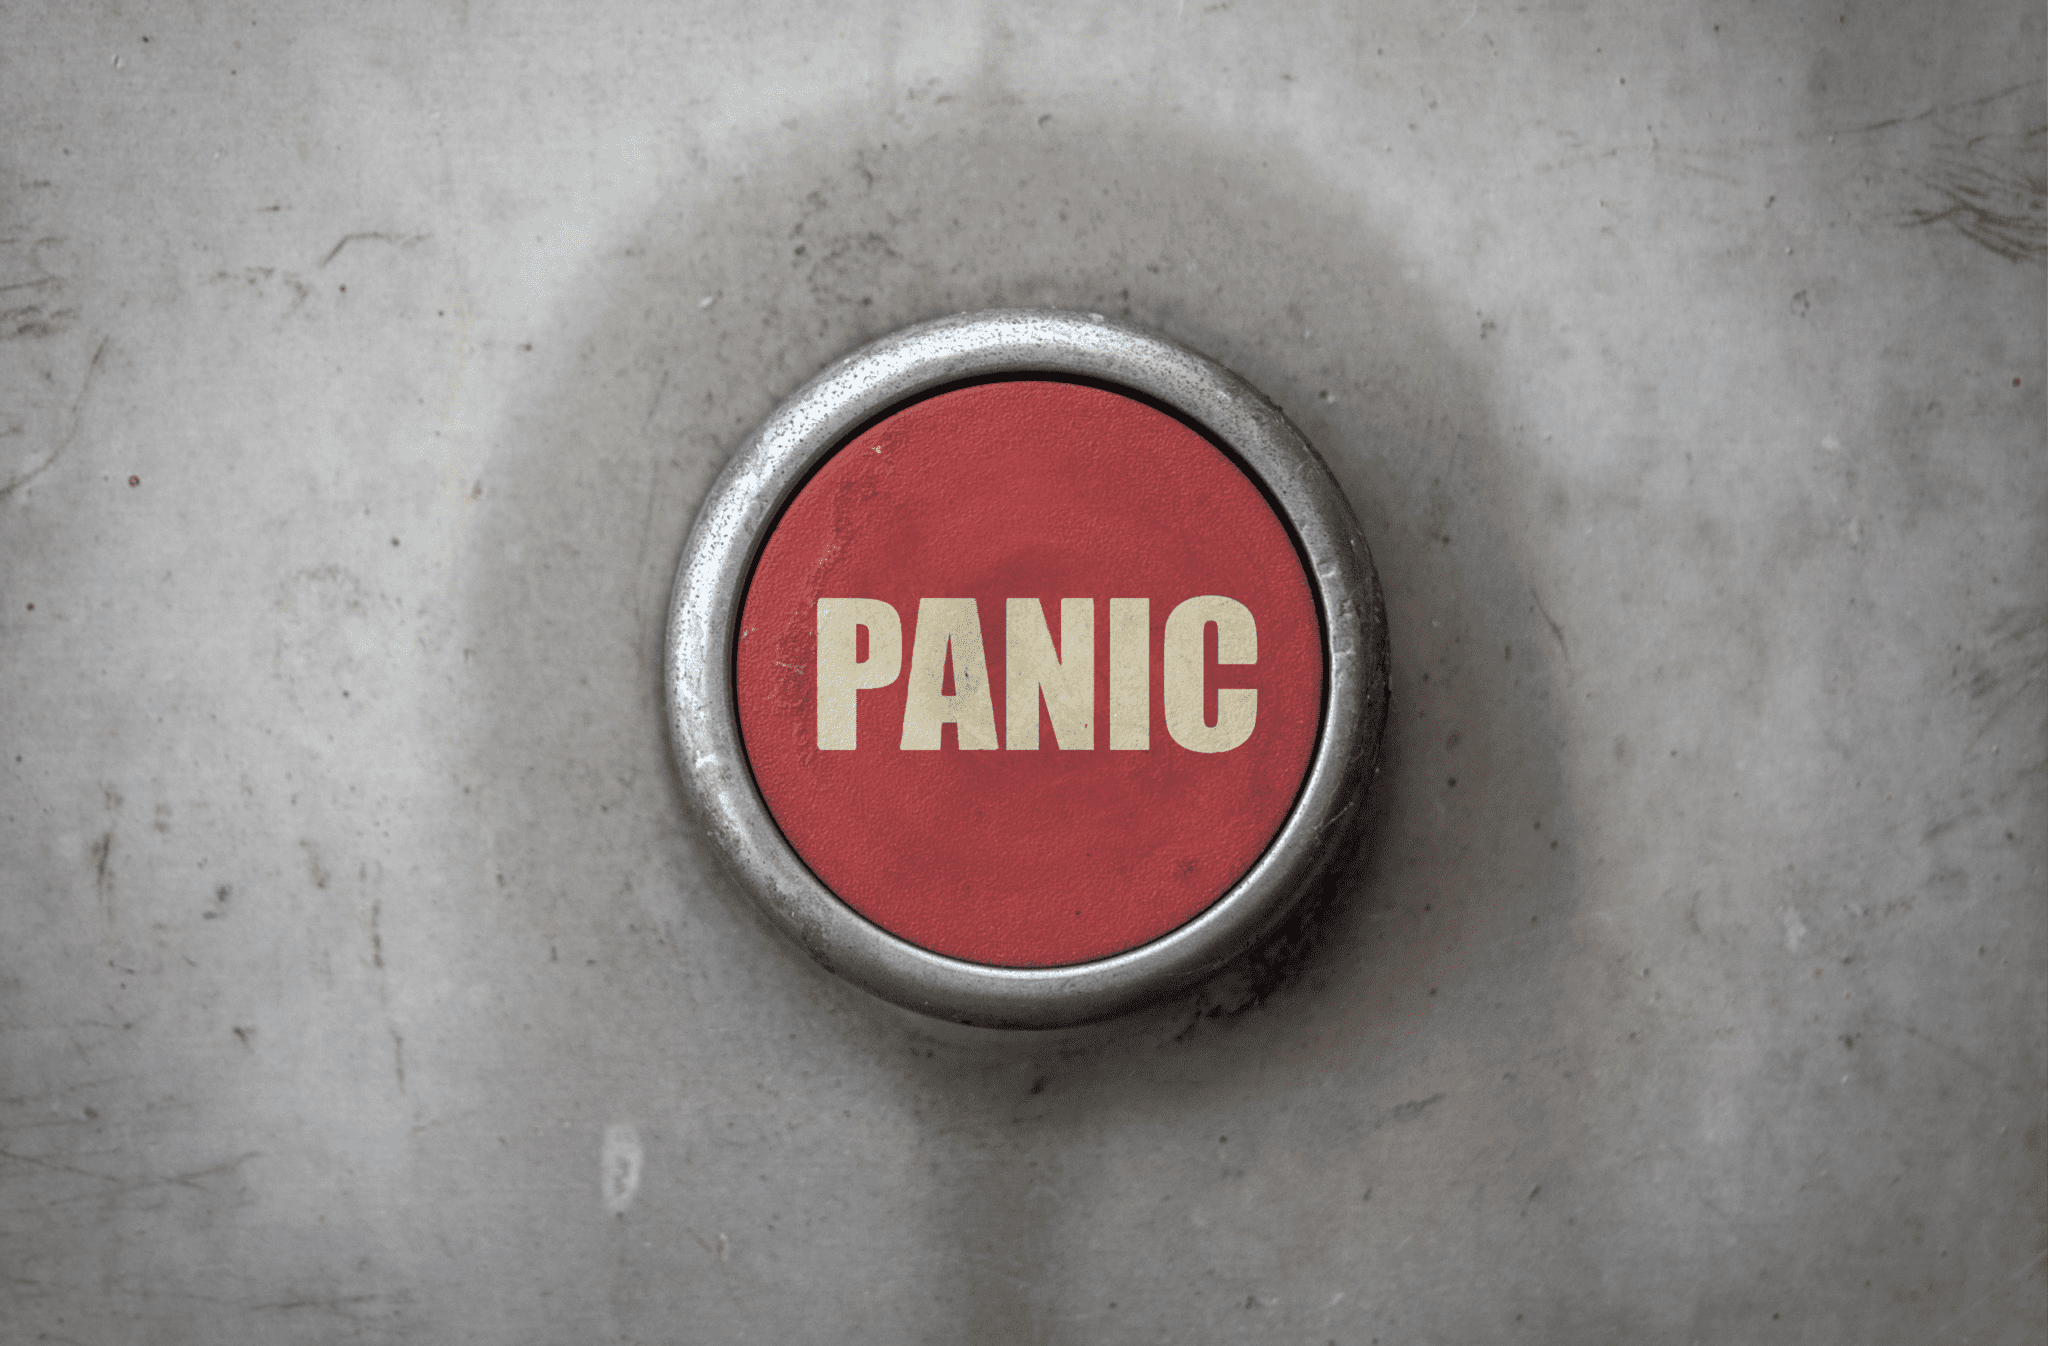 The image shows a red button with white writing saying panic in capital letters.